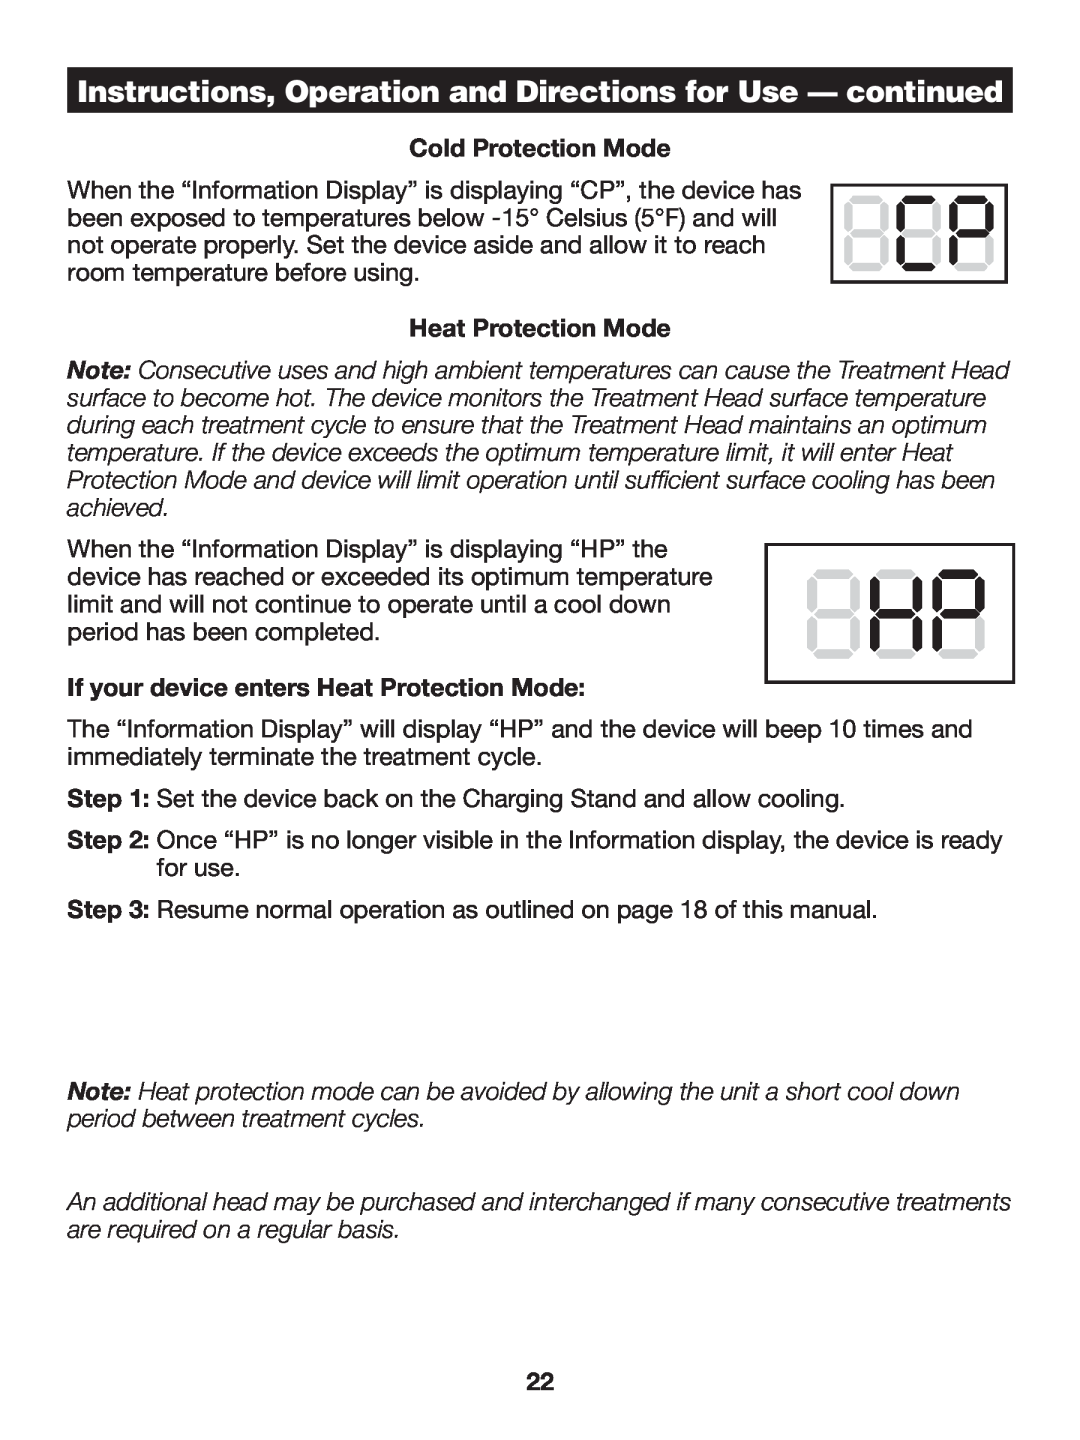 Verilux CW01 manual Instructions, Operation and Directions for Use - continued, Cold Protection Mode, Heat Protection Mode 